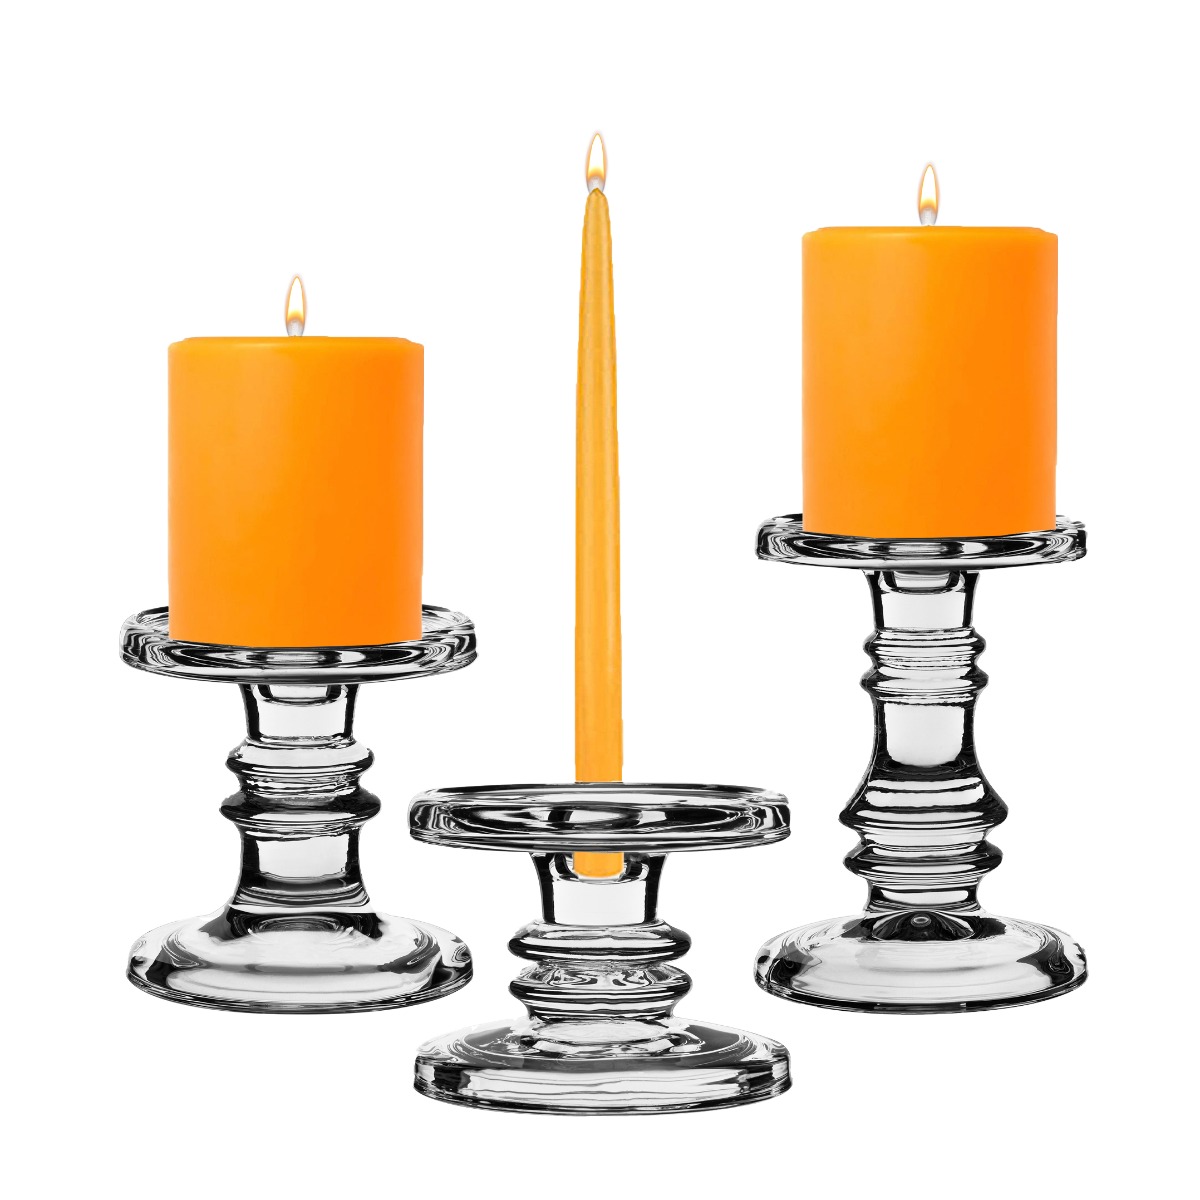 D-3 H-3.5 | 5.5 | 7.5 CYS EXCEL Glass Candle Holder Set of 3 Wedding Centerpieces Candlestick Holder Sets | Multiple Size Choices Pillar & Taper Candle Holders 